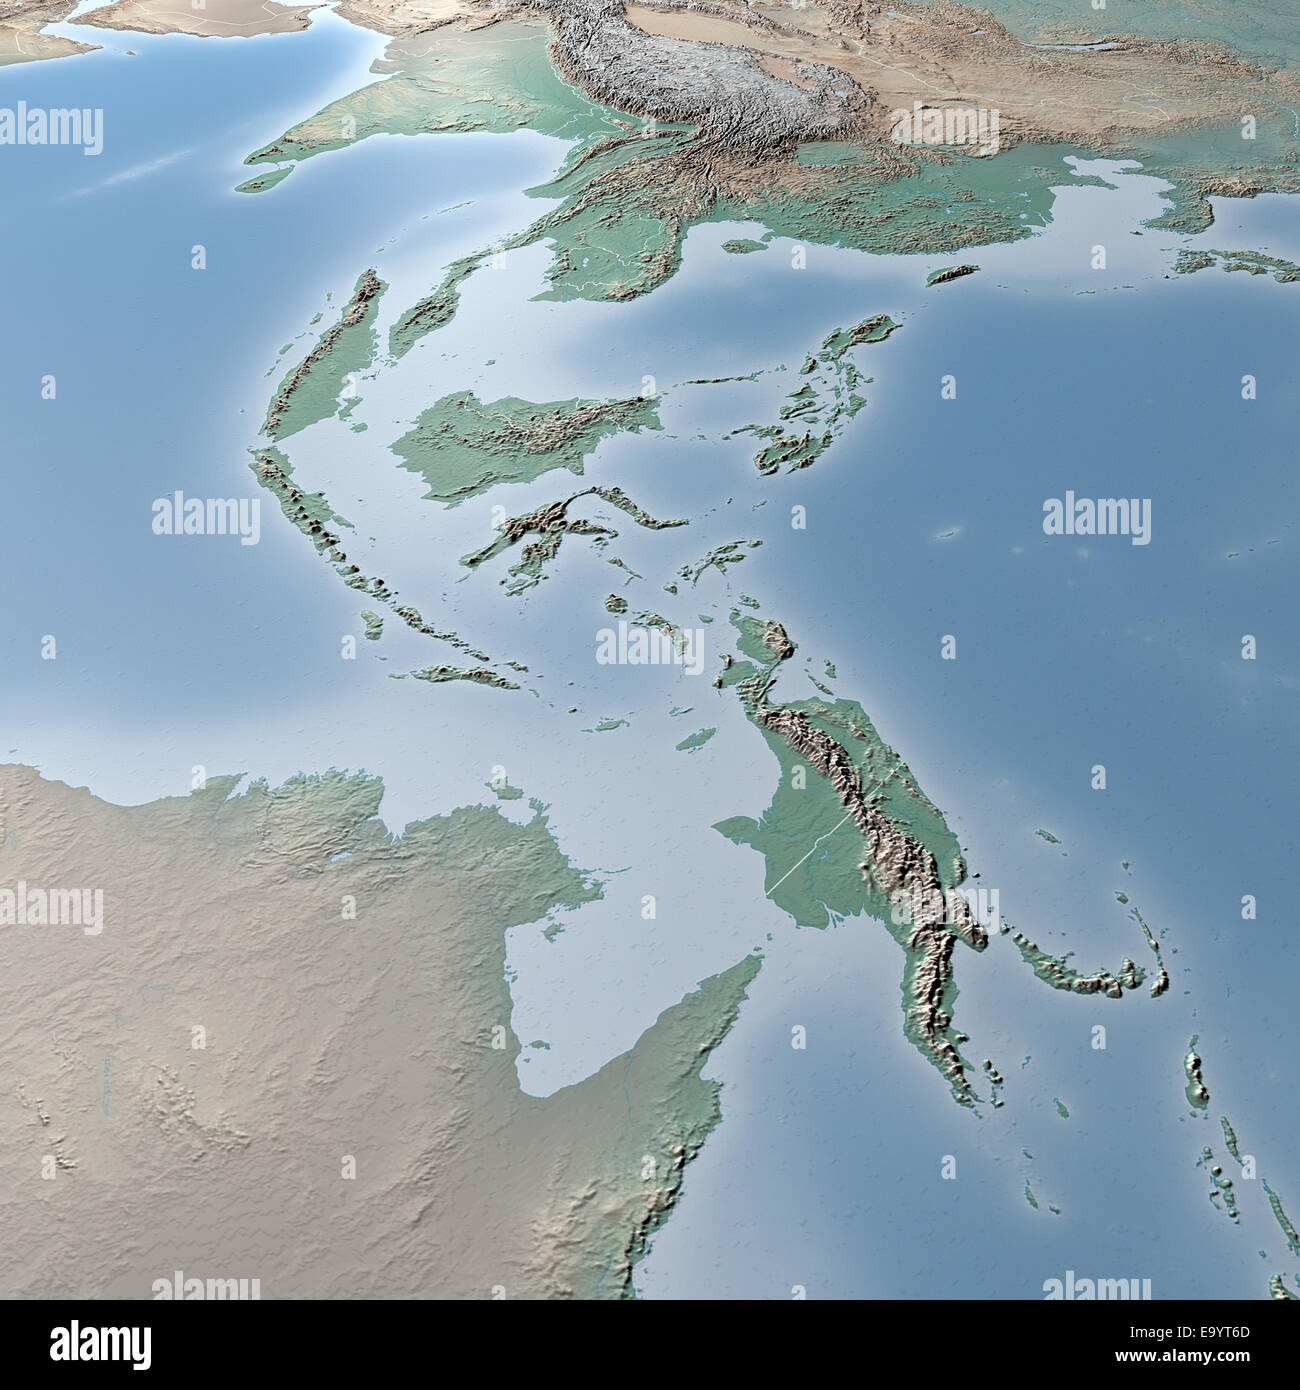 World Map, physical map, South East Asia, Indonesia Stock Photo